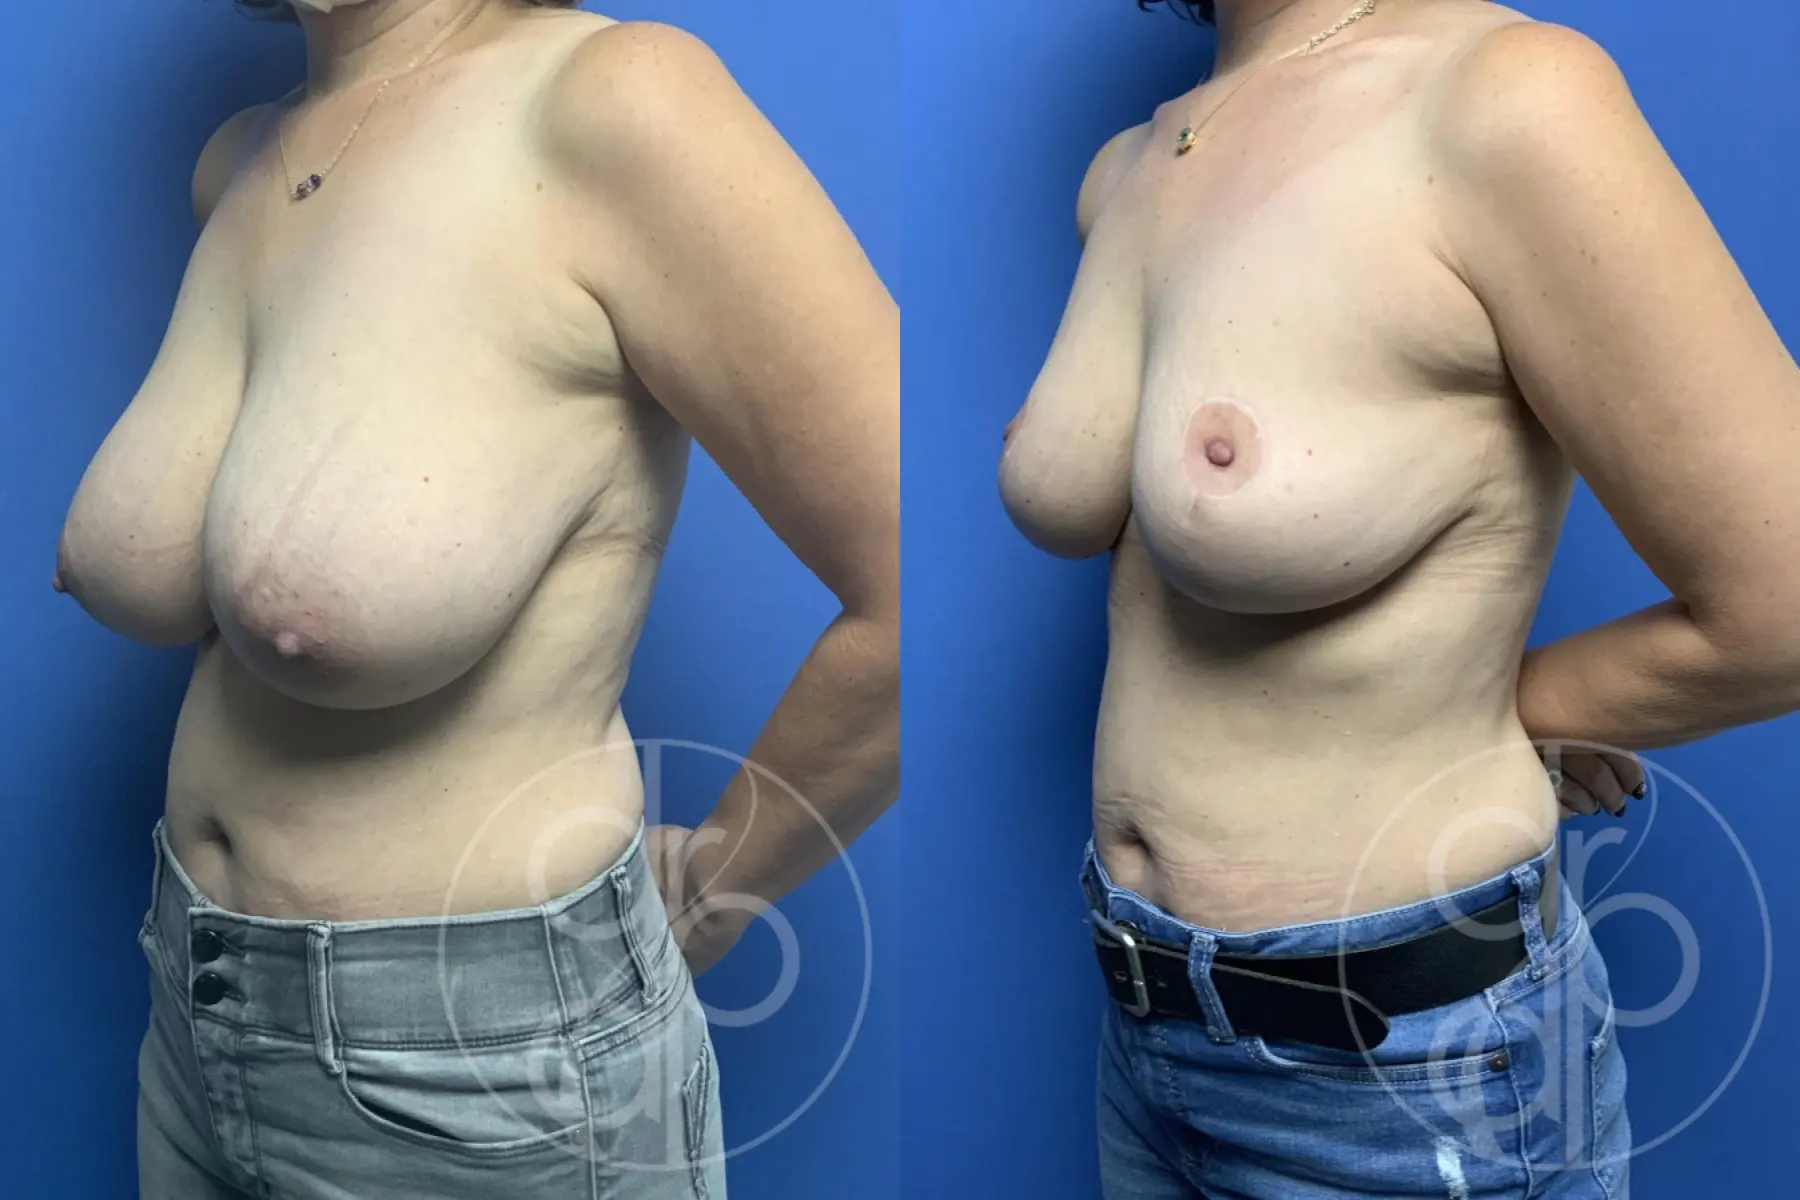 Breast Reduction: Patient 1 - Before and After 3